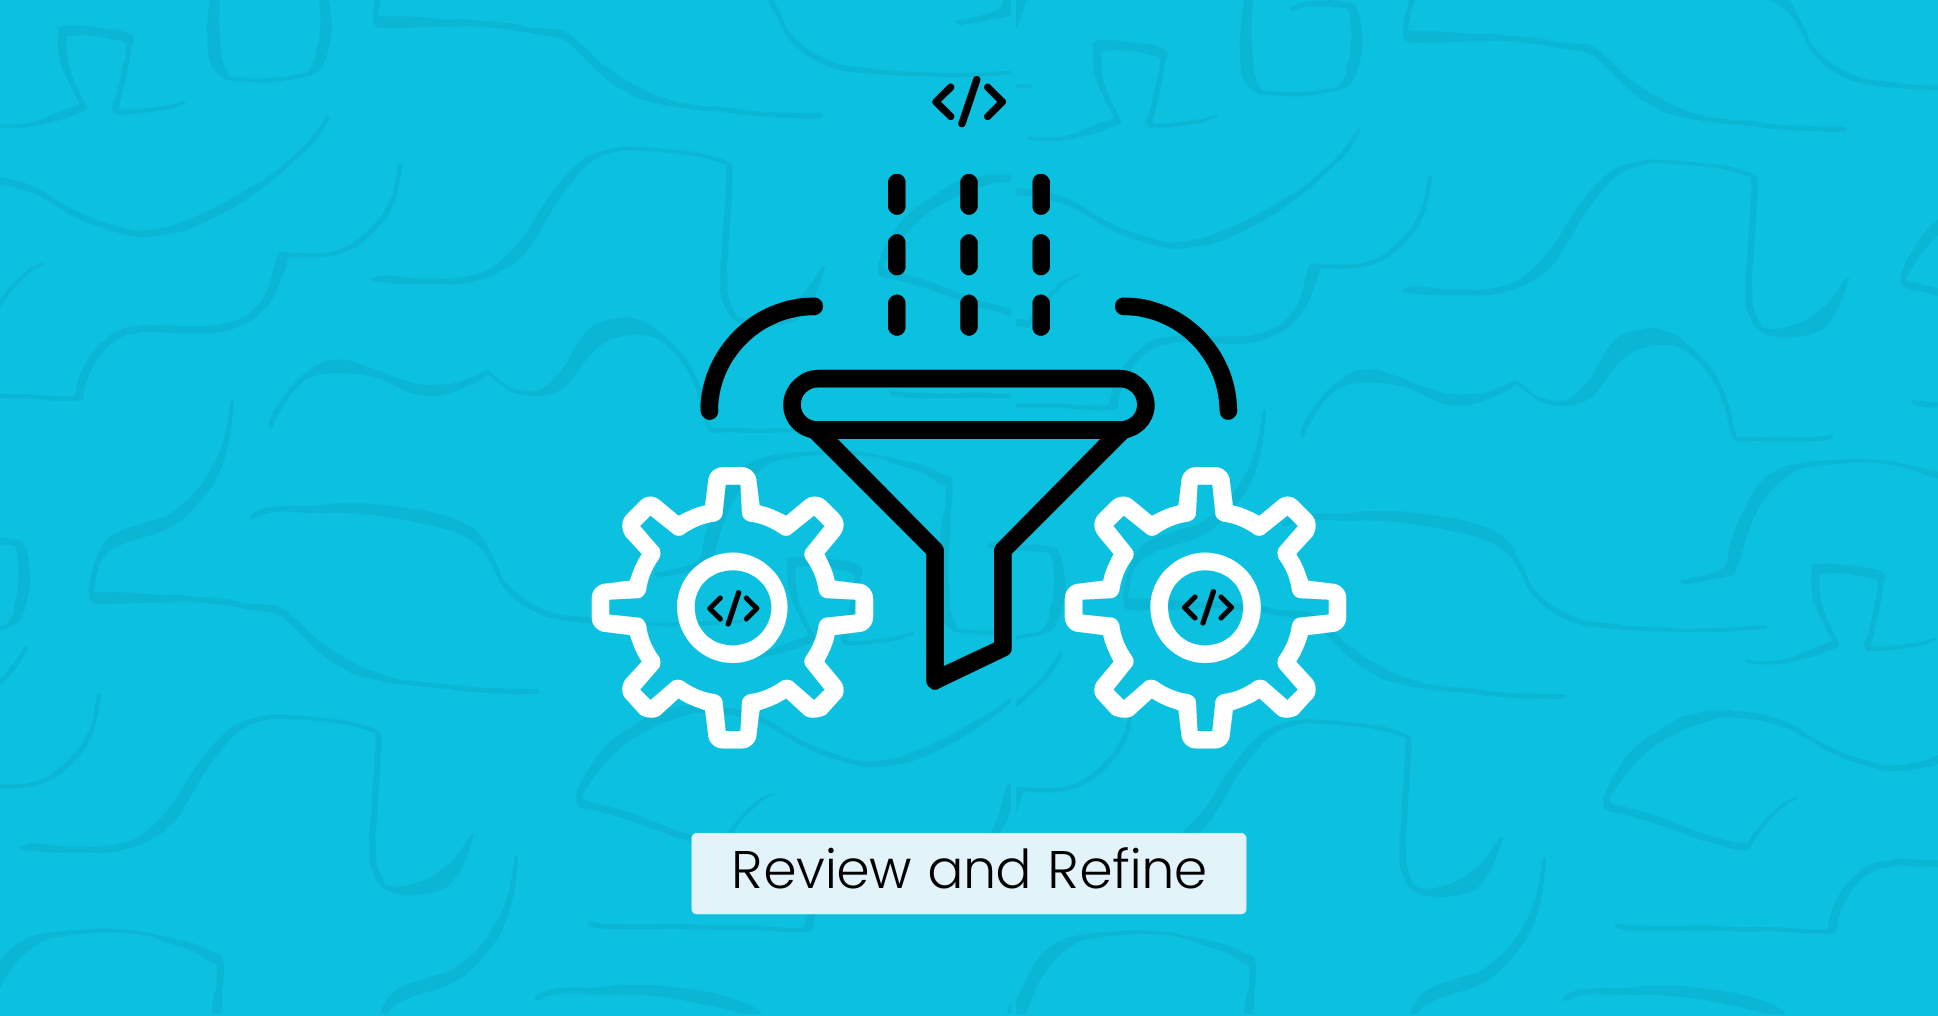 Review and Refine